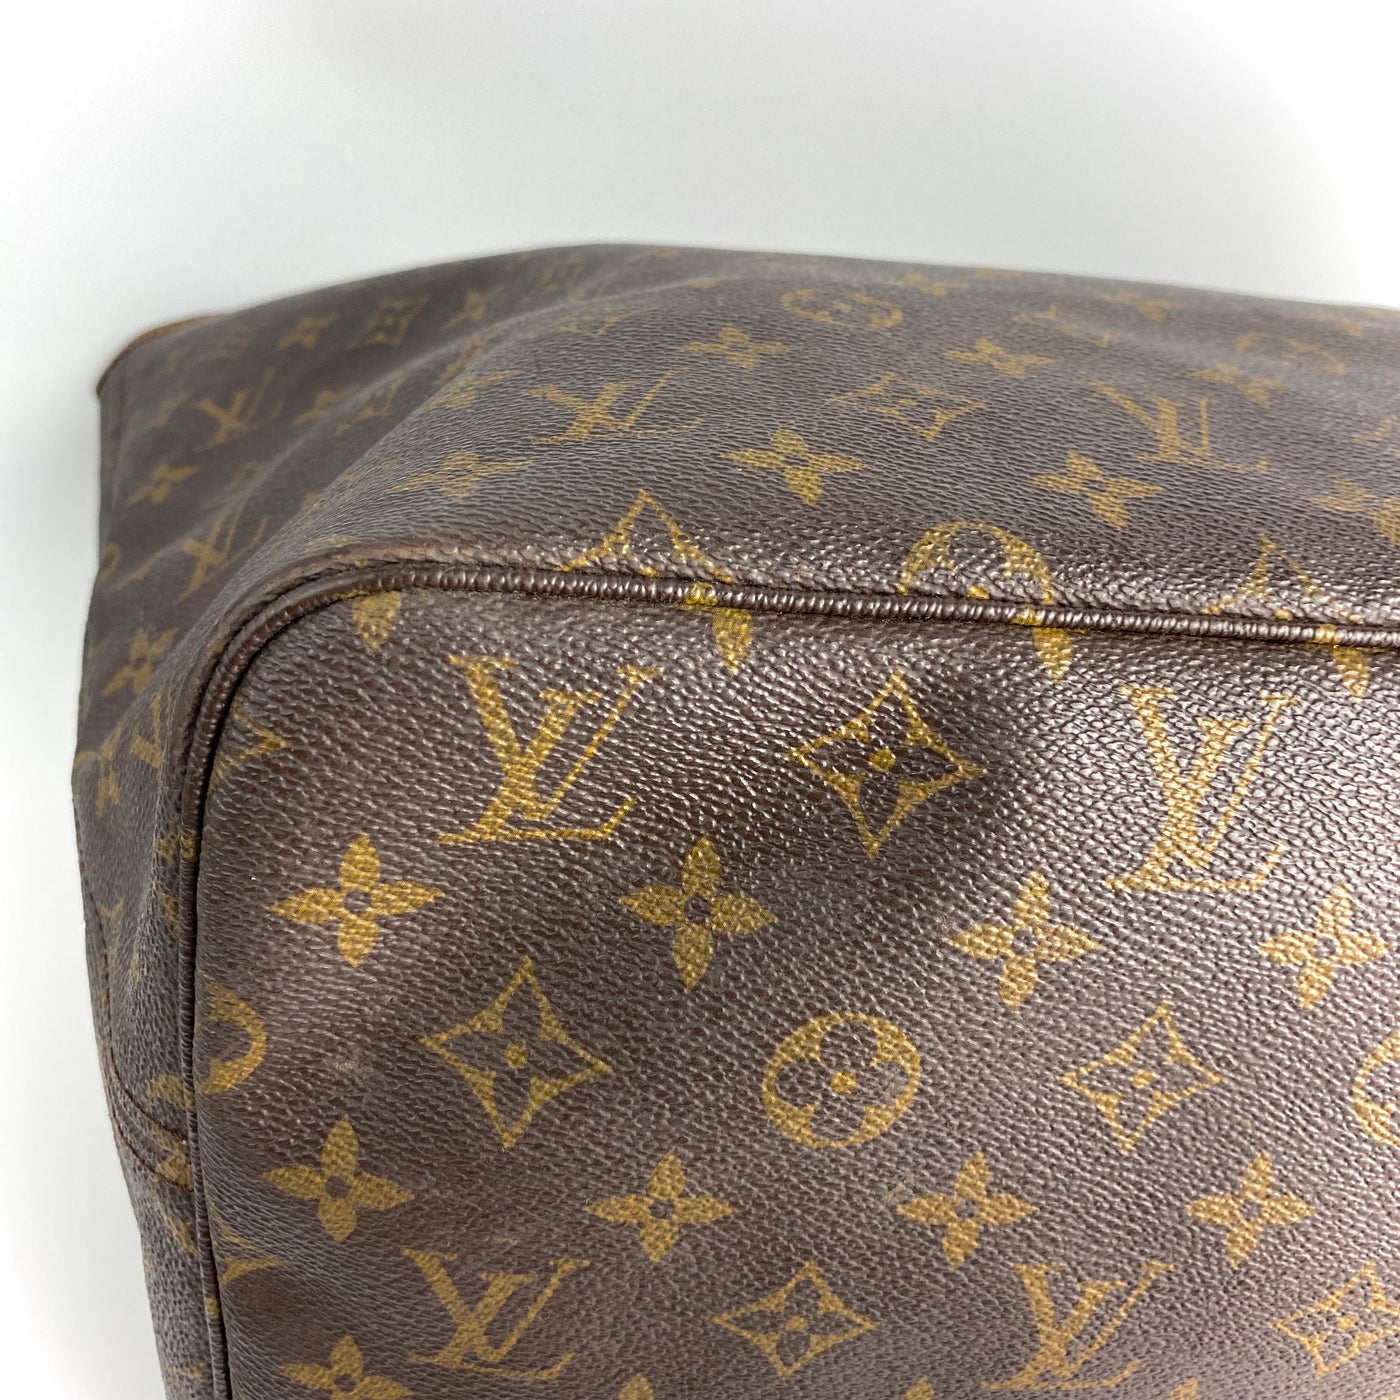 Louis Vuitton Neverfull GM Monogram Canvas Tote Bag with yellow